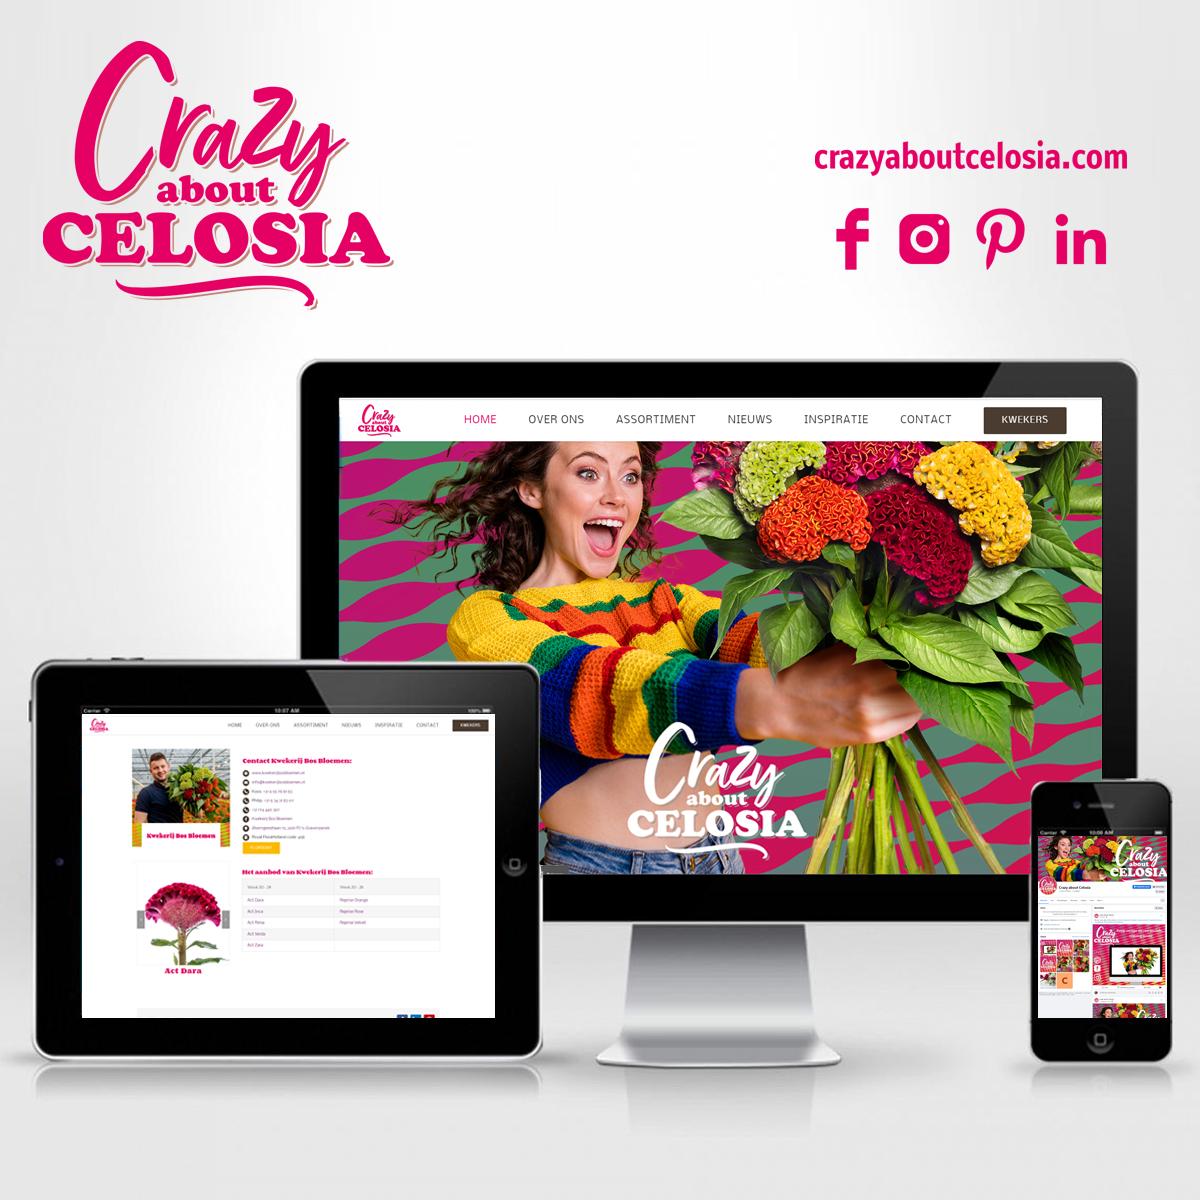 Iedereen Crazy about Celosia